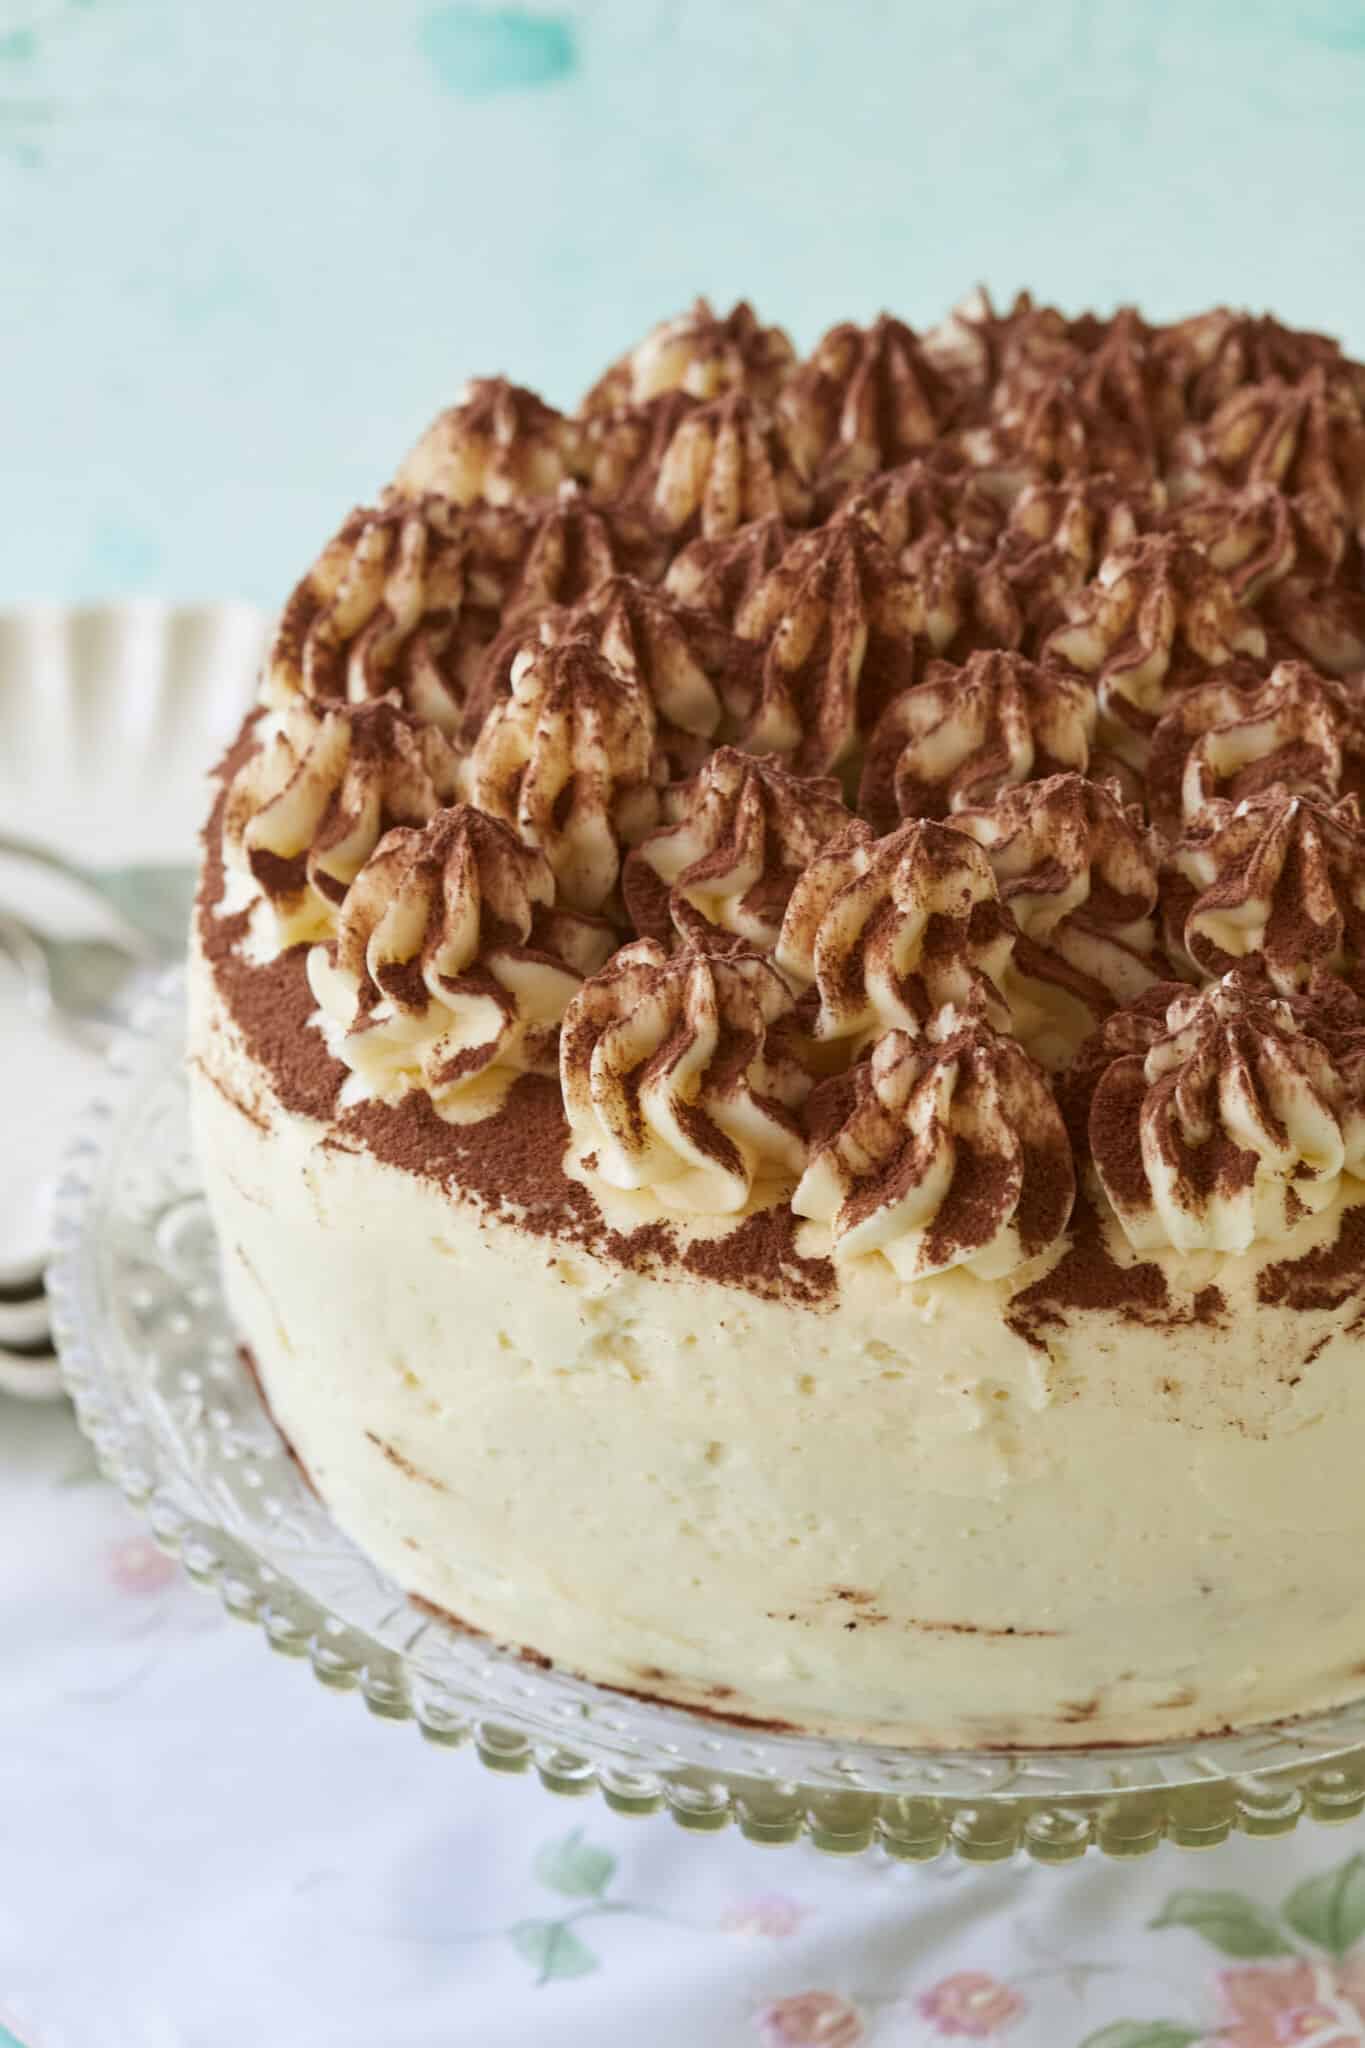 A Stunning Tiramisu Cake is being displayed on a glass cake stand. This layered tiramisu cake is topped with rosettes and dusted cocoa which makes it visually appealing. 